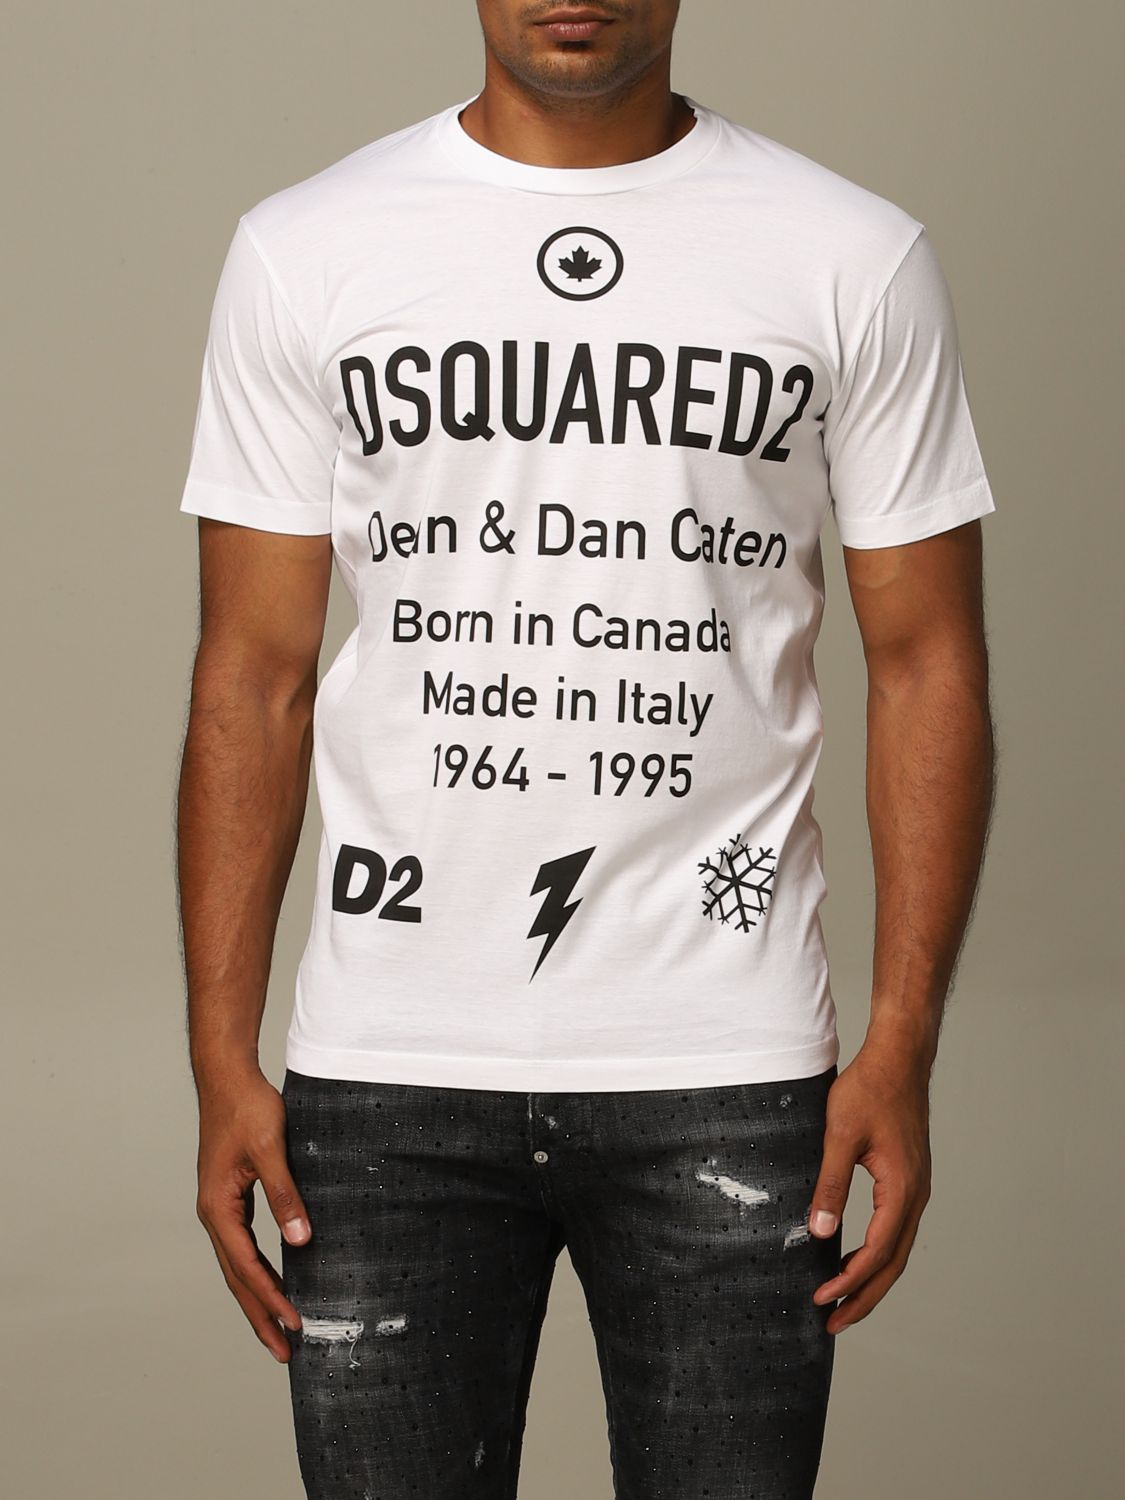 tee shirt dsquared gris